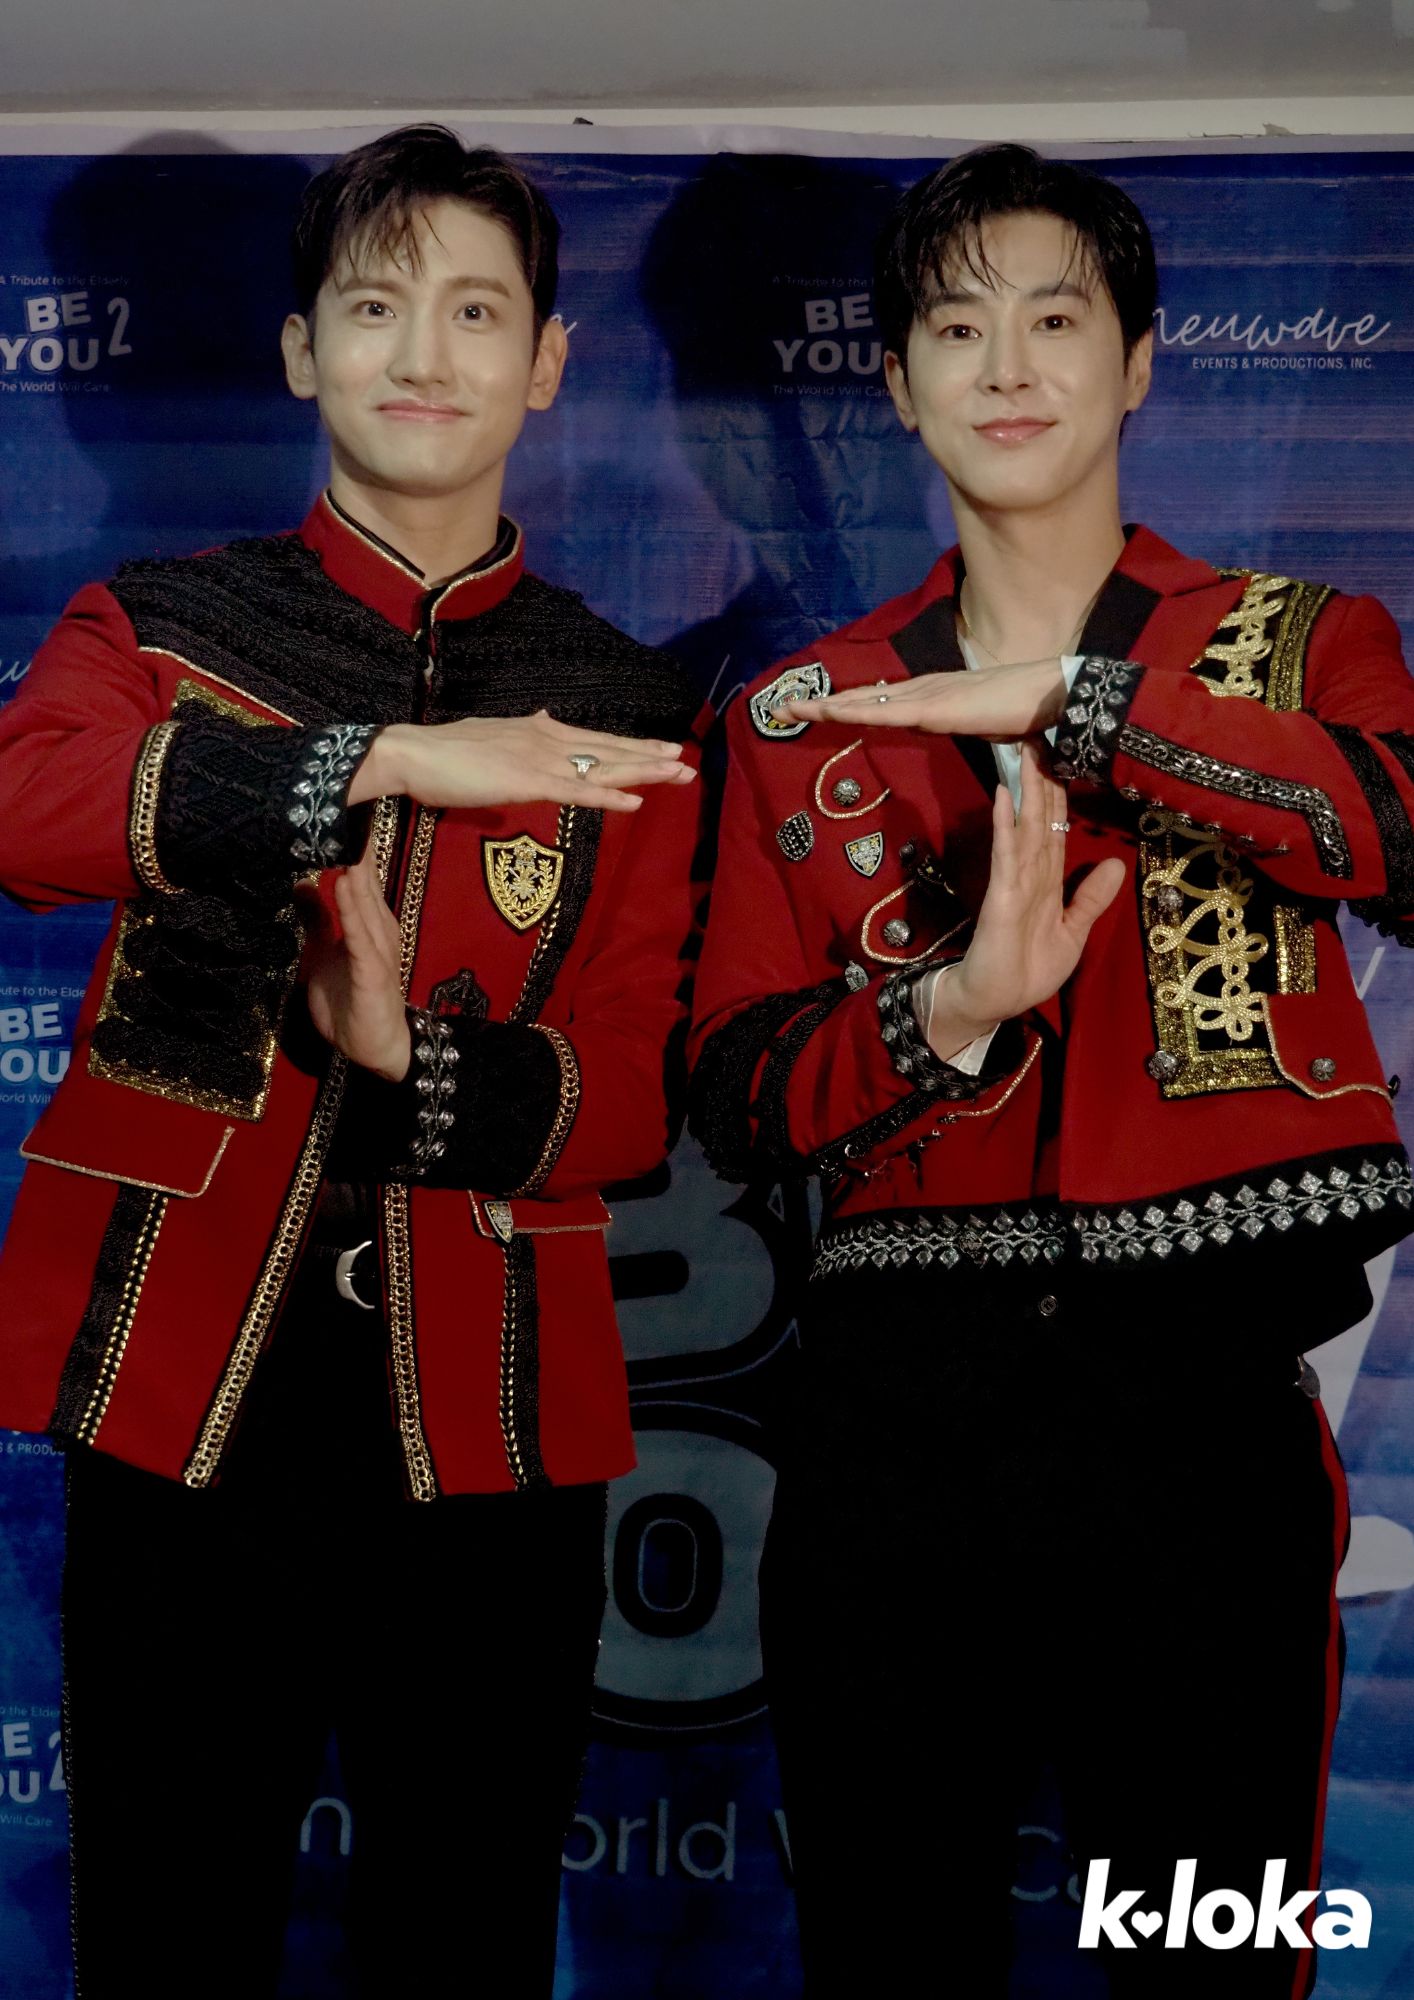 TVXQ's Yunho and Changmin doing the We Are T! sign at the Be You 2 Manila presscon